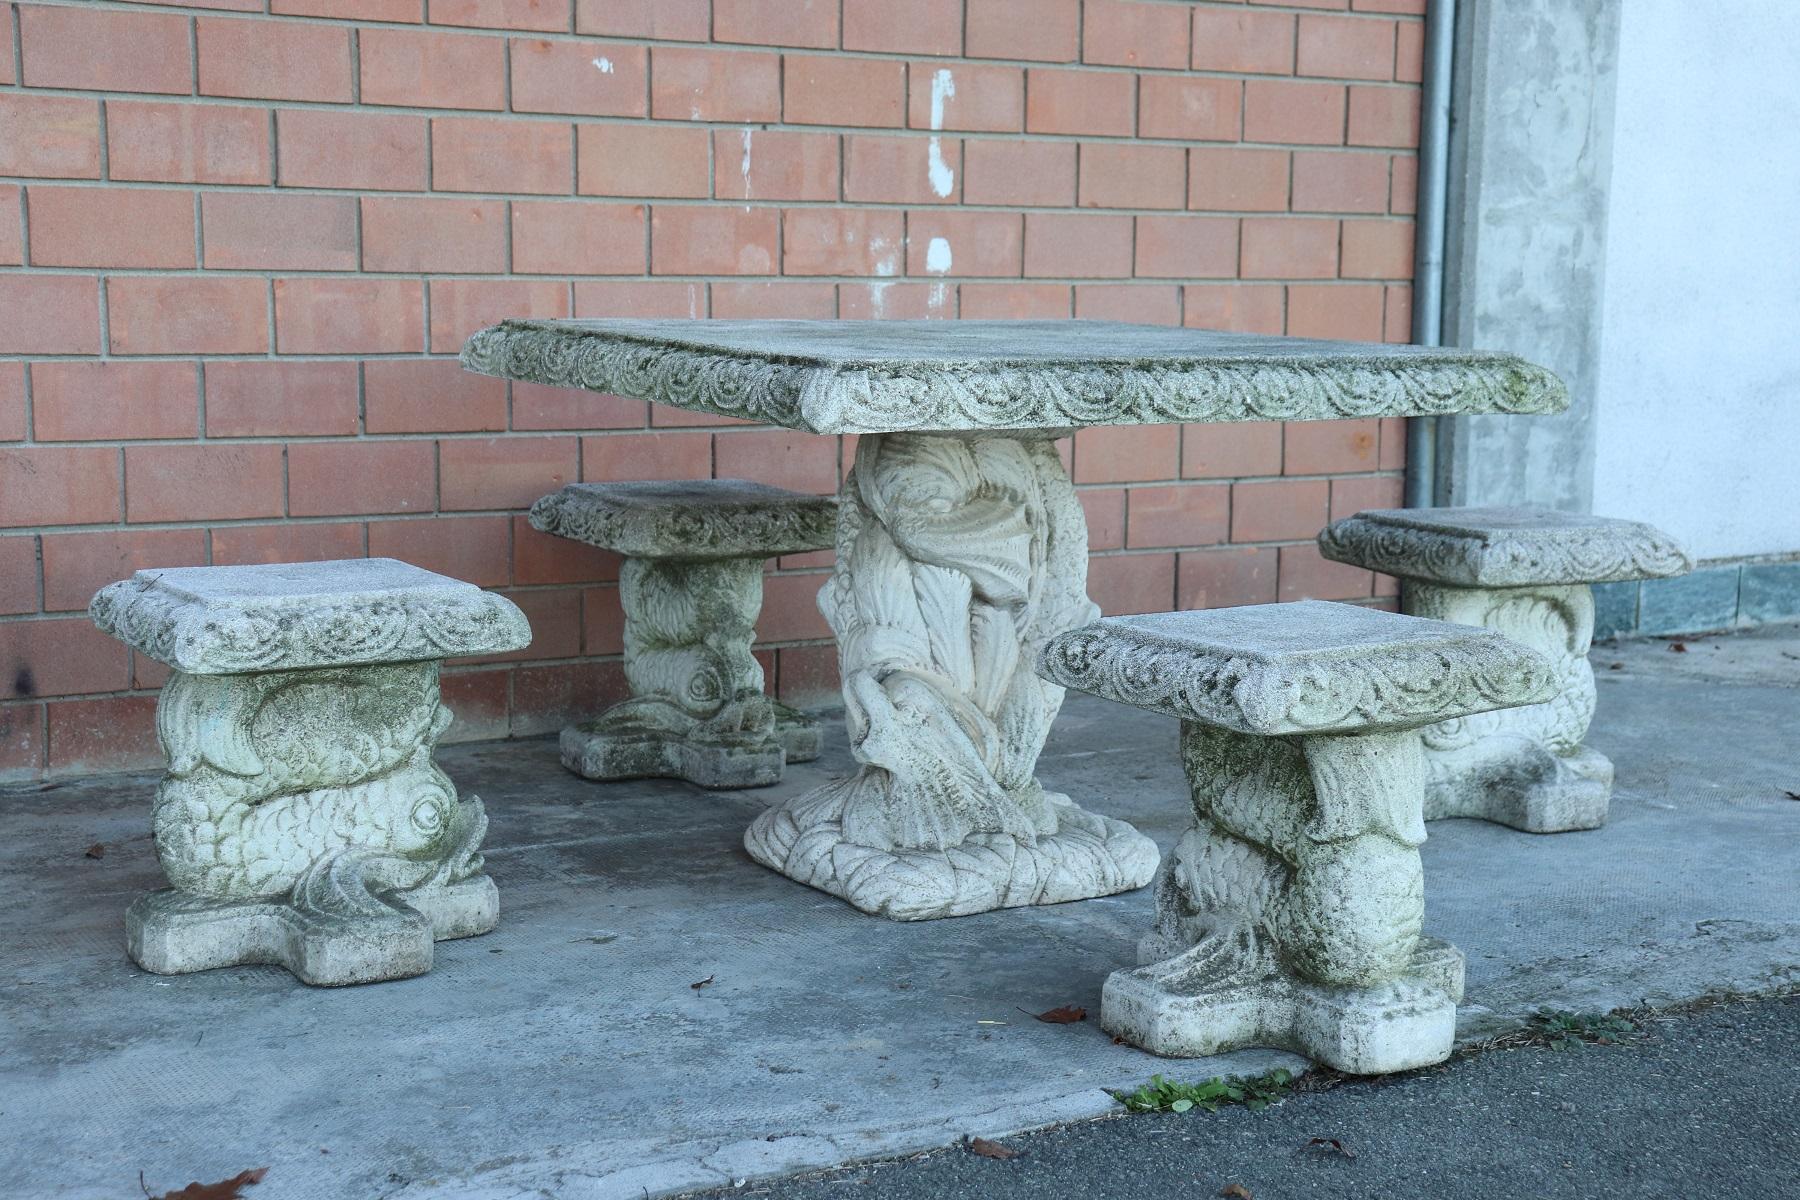 Beautiful refined garden set in Charlex style, circa 1920s main material stone mixed with gravel and cement. Beautiful square table with four stools. Gorgeous carved decoration with large tritons supporting the table top and the seats of the stools.